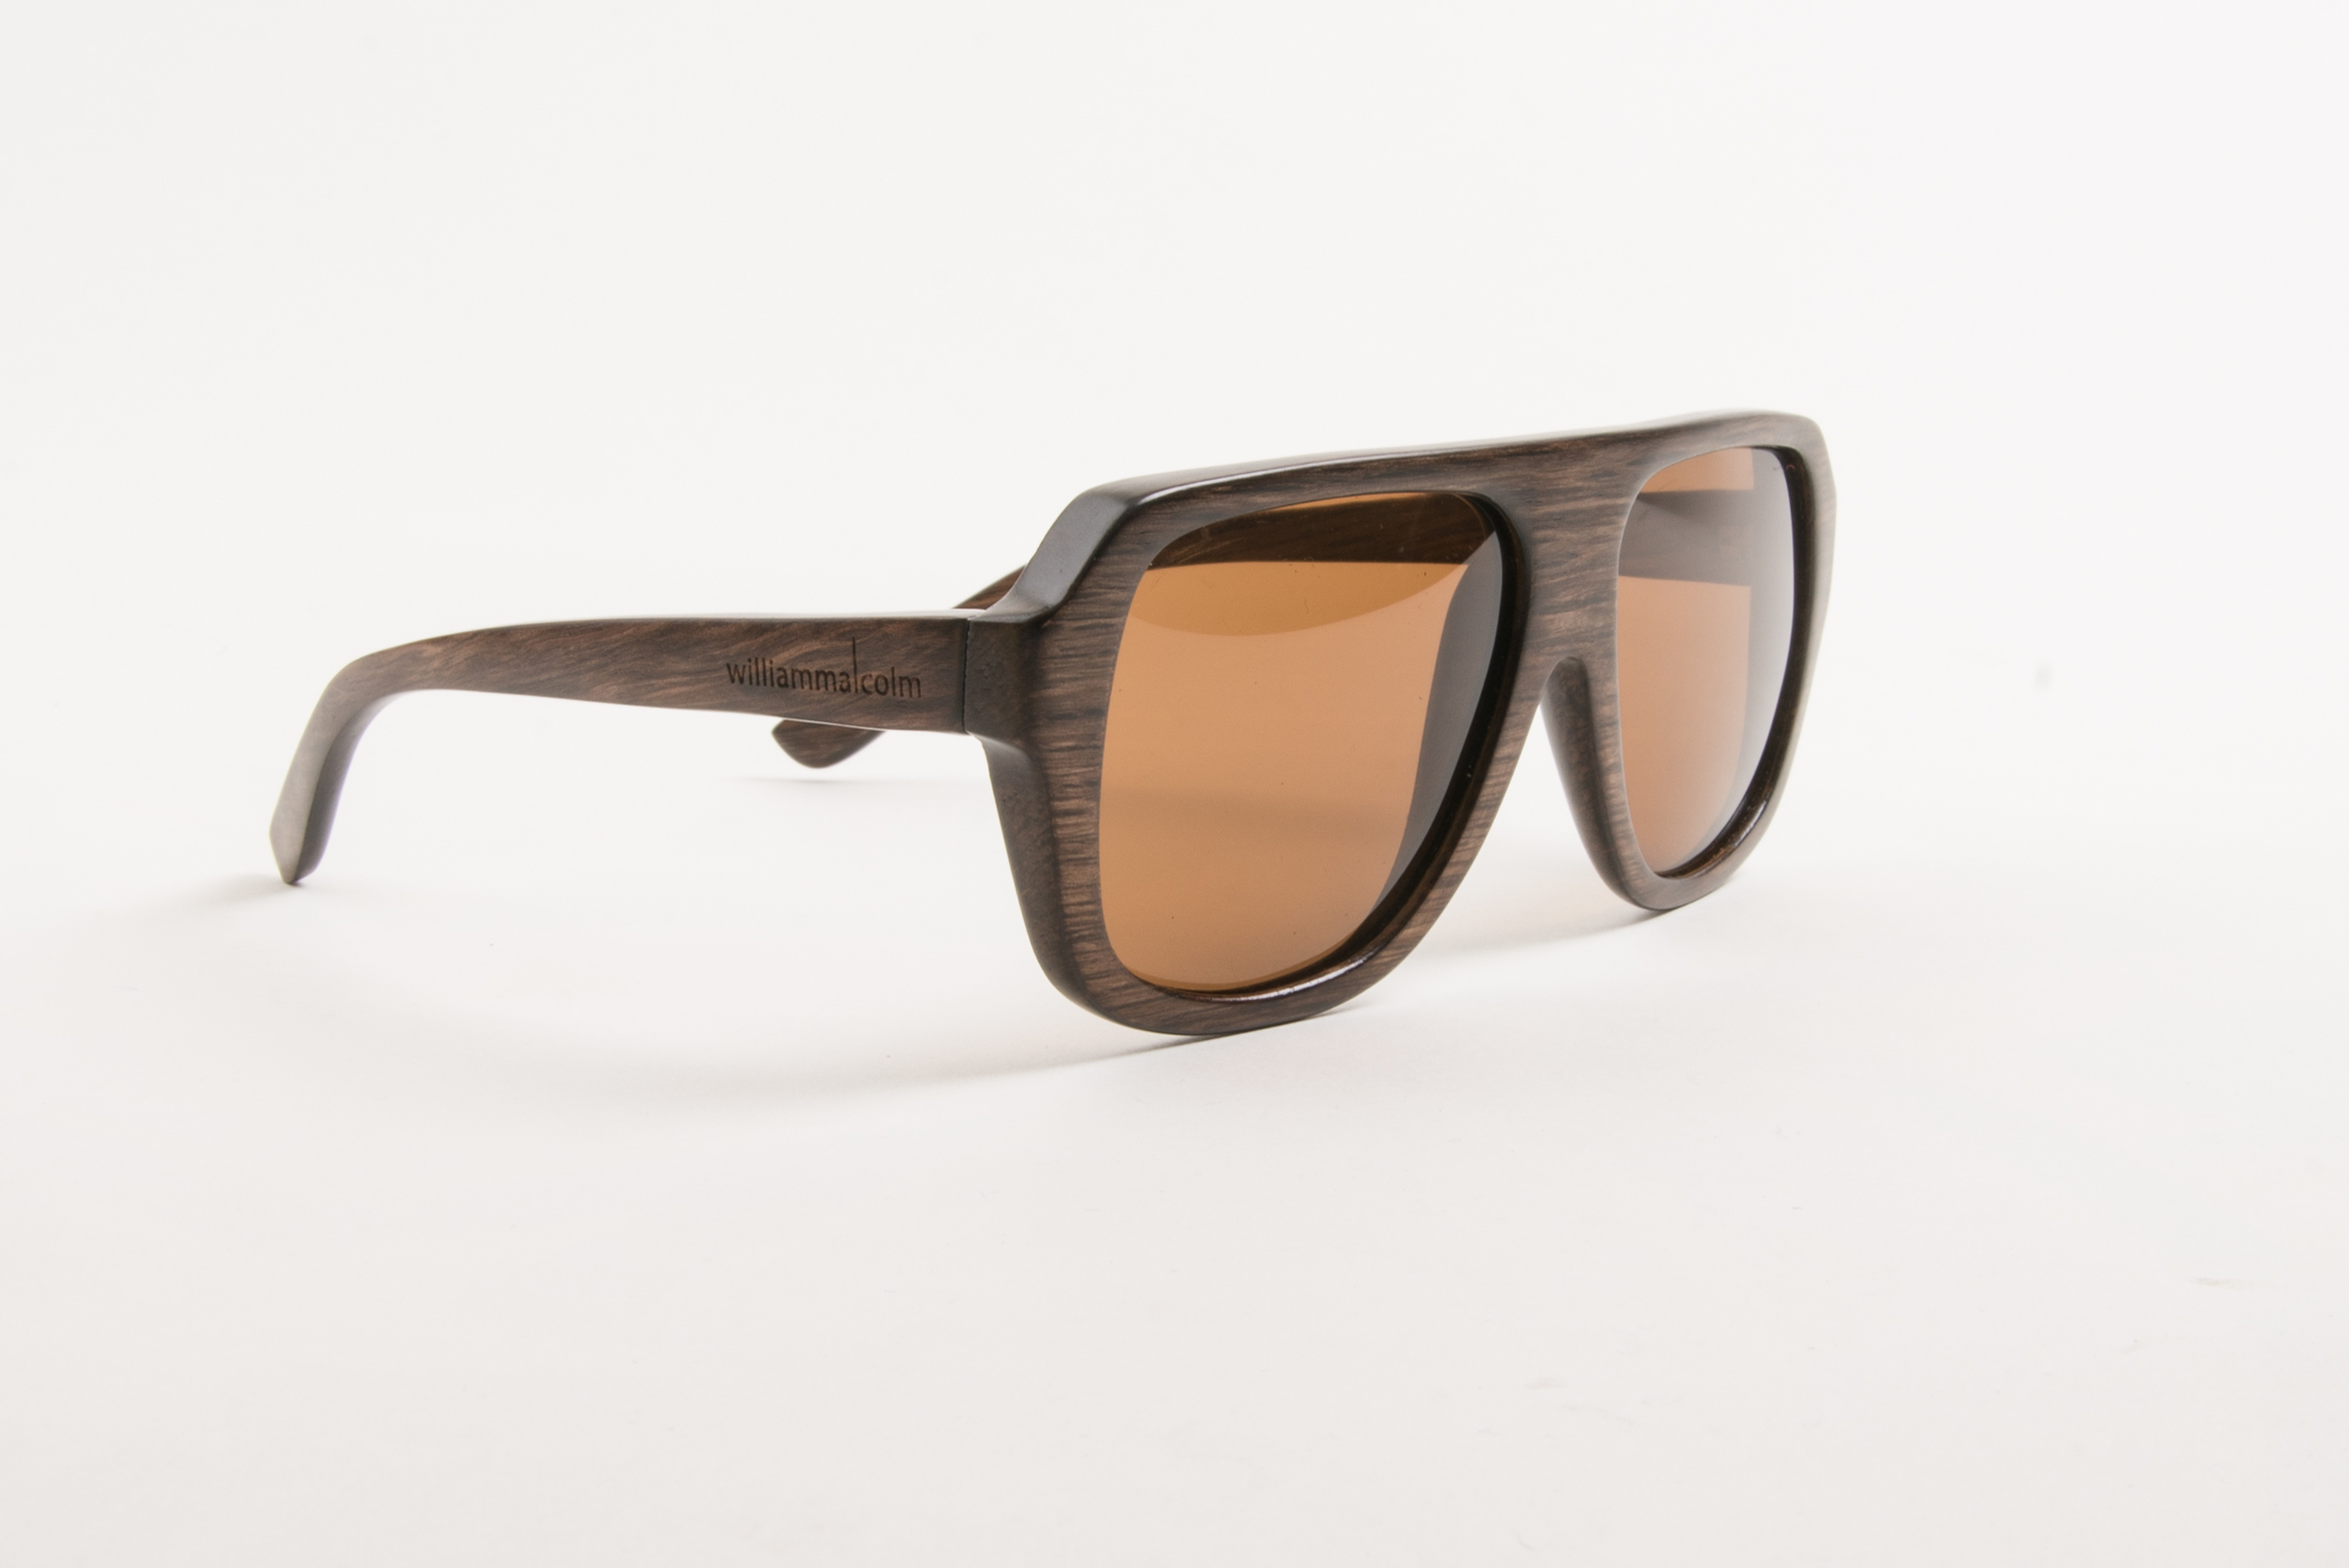 William Malcolm Luxe Collection Wood Eyewear